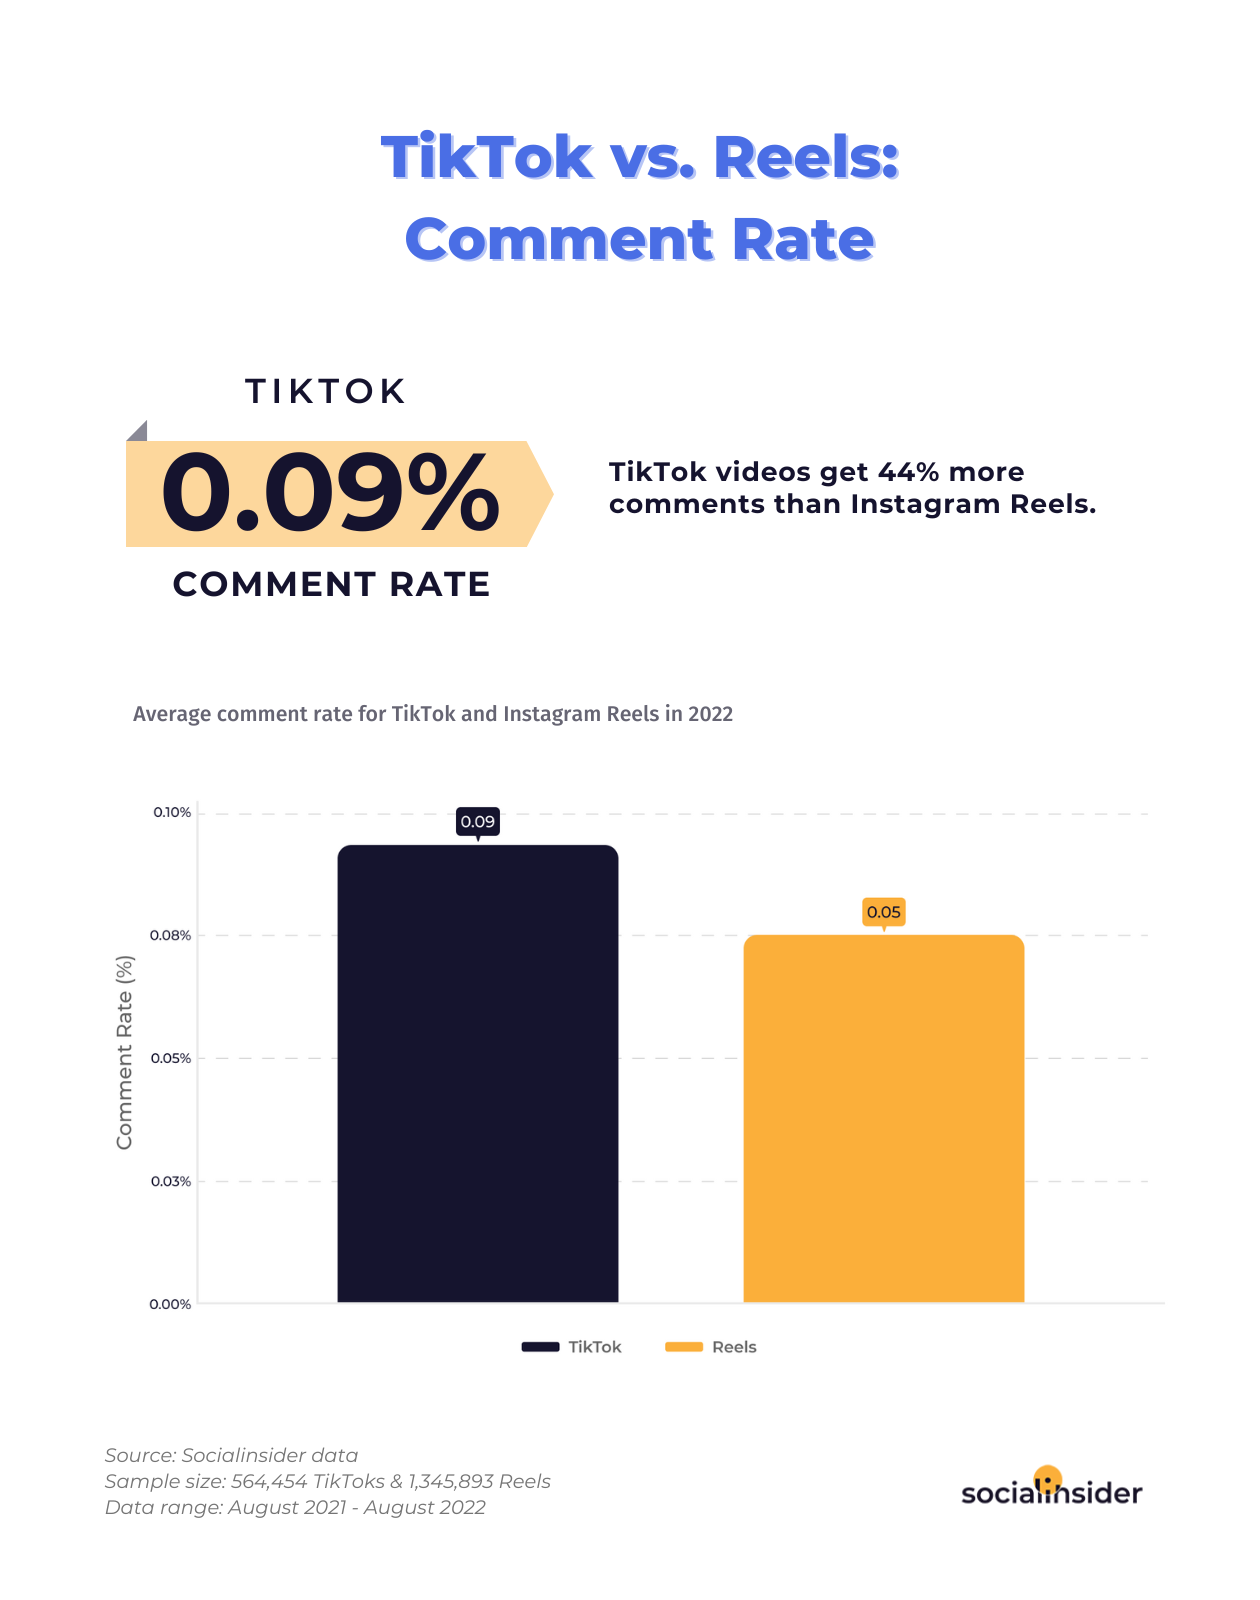 This is a chart showing stats about Instagram Reels vs TikTok from a comment rate perspective.